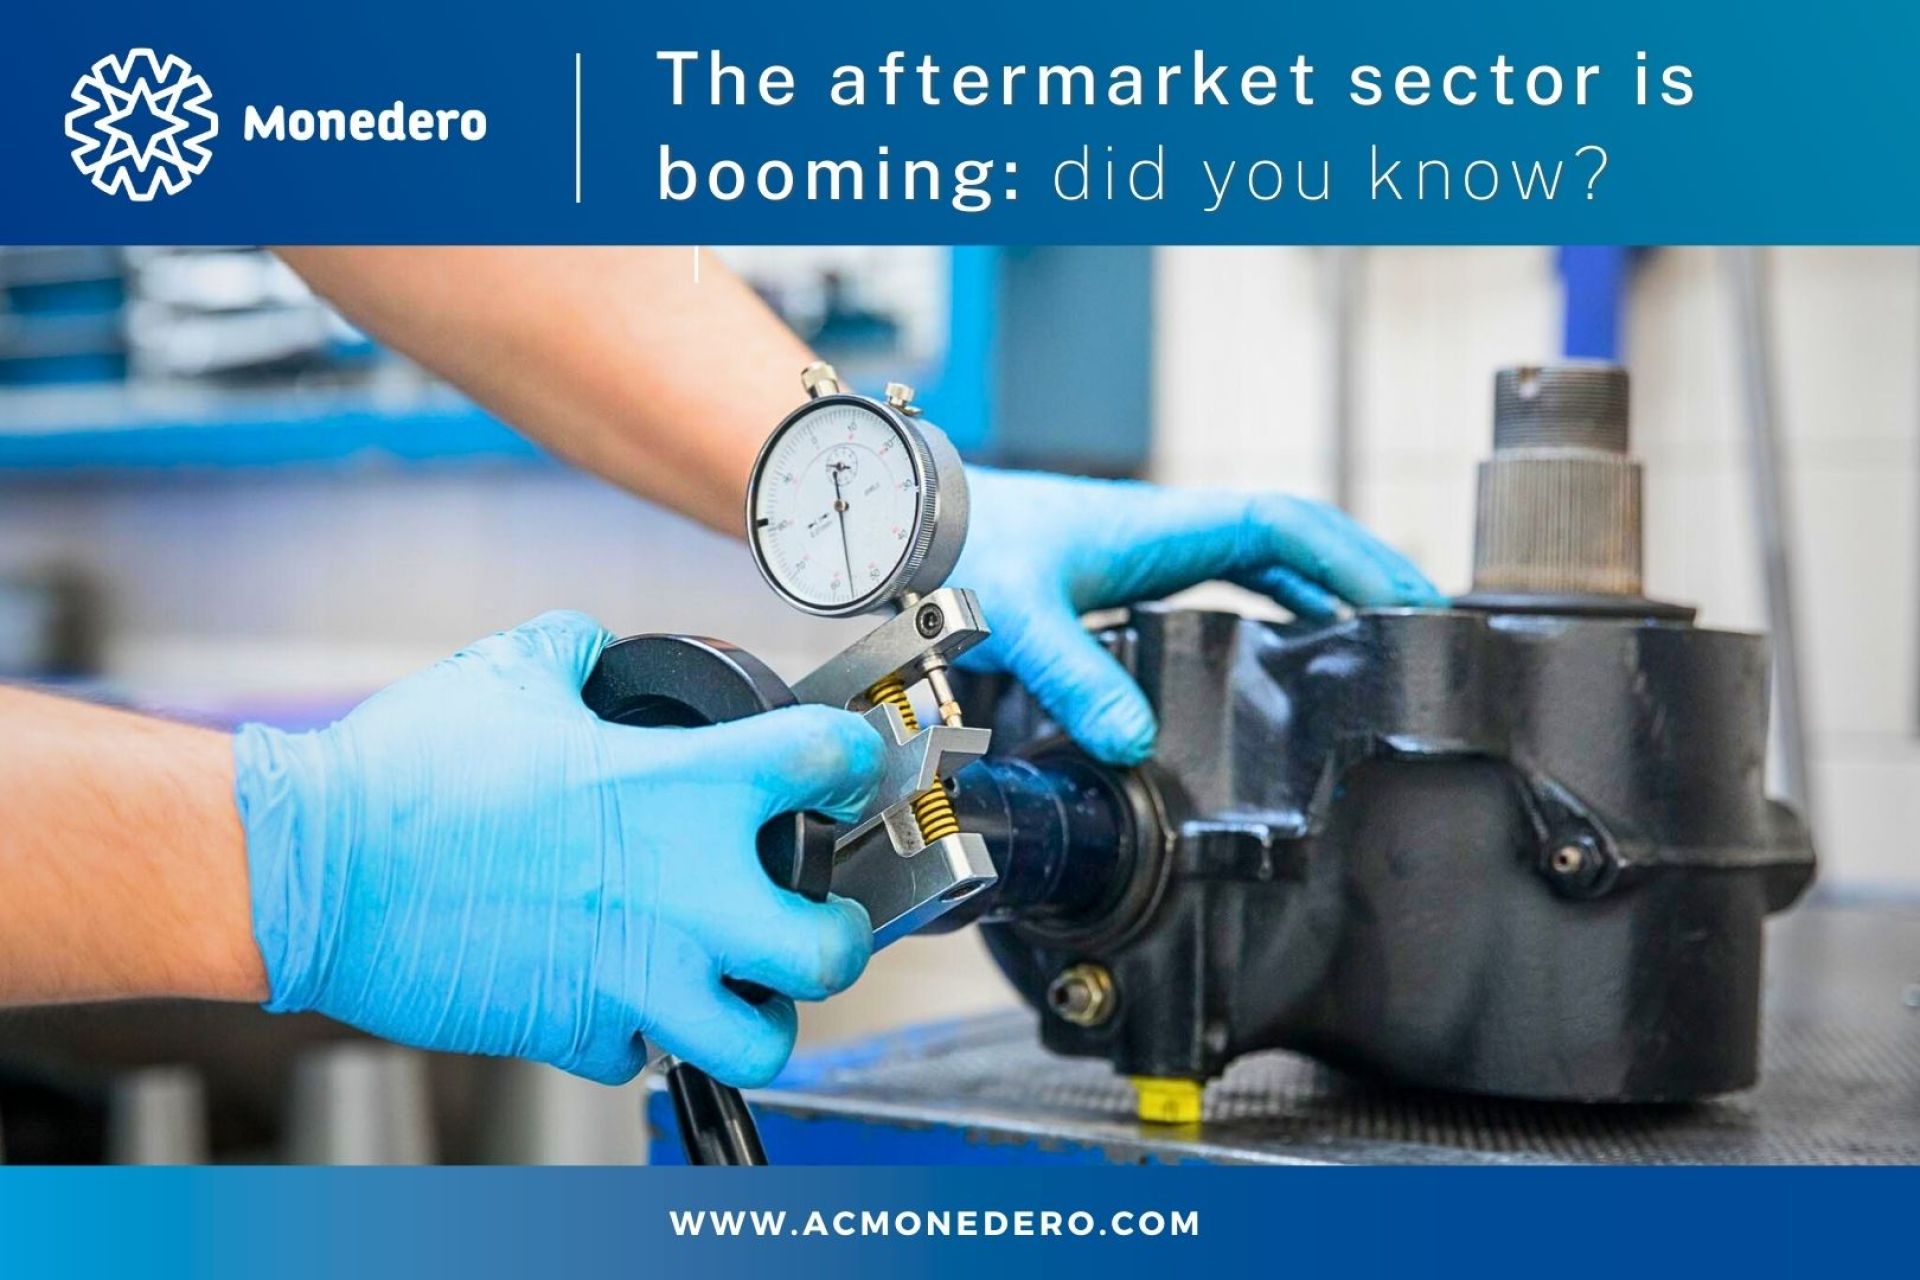 The aftermarket sector is booming.